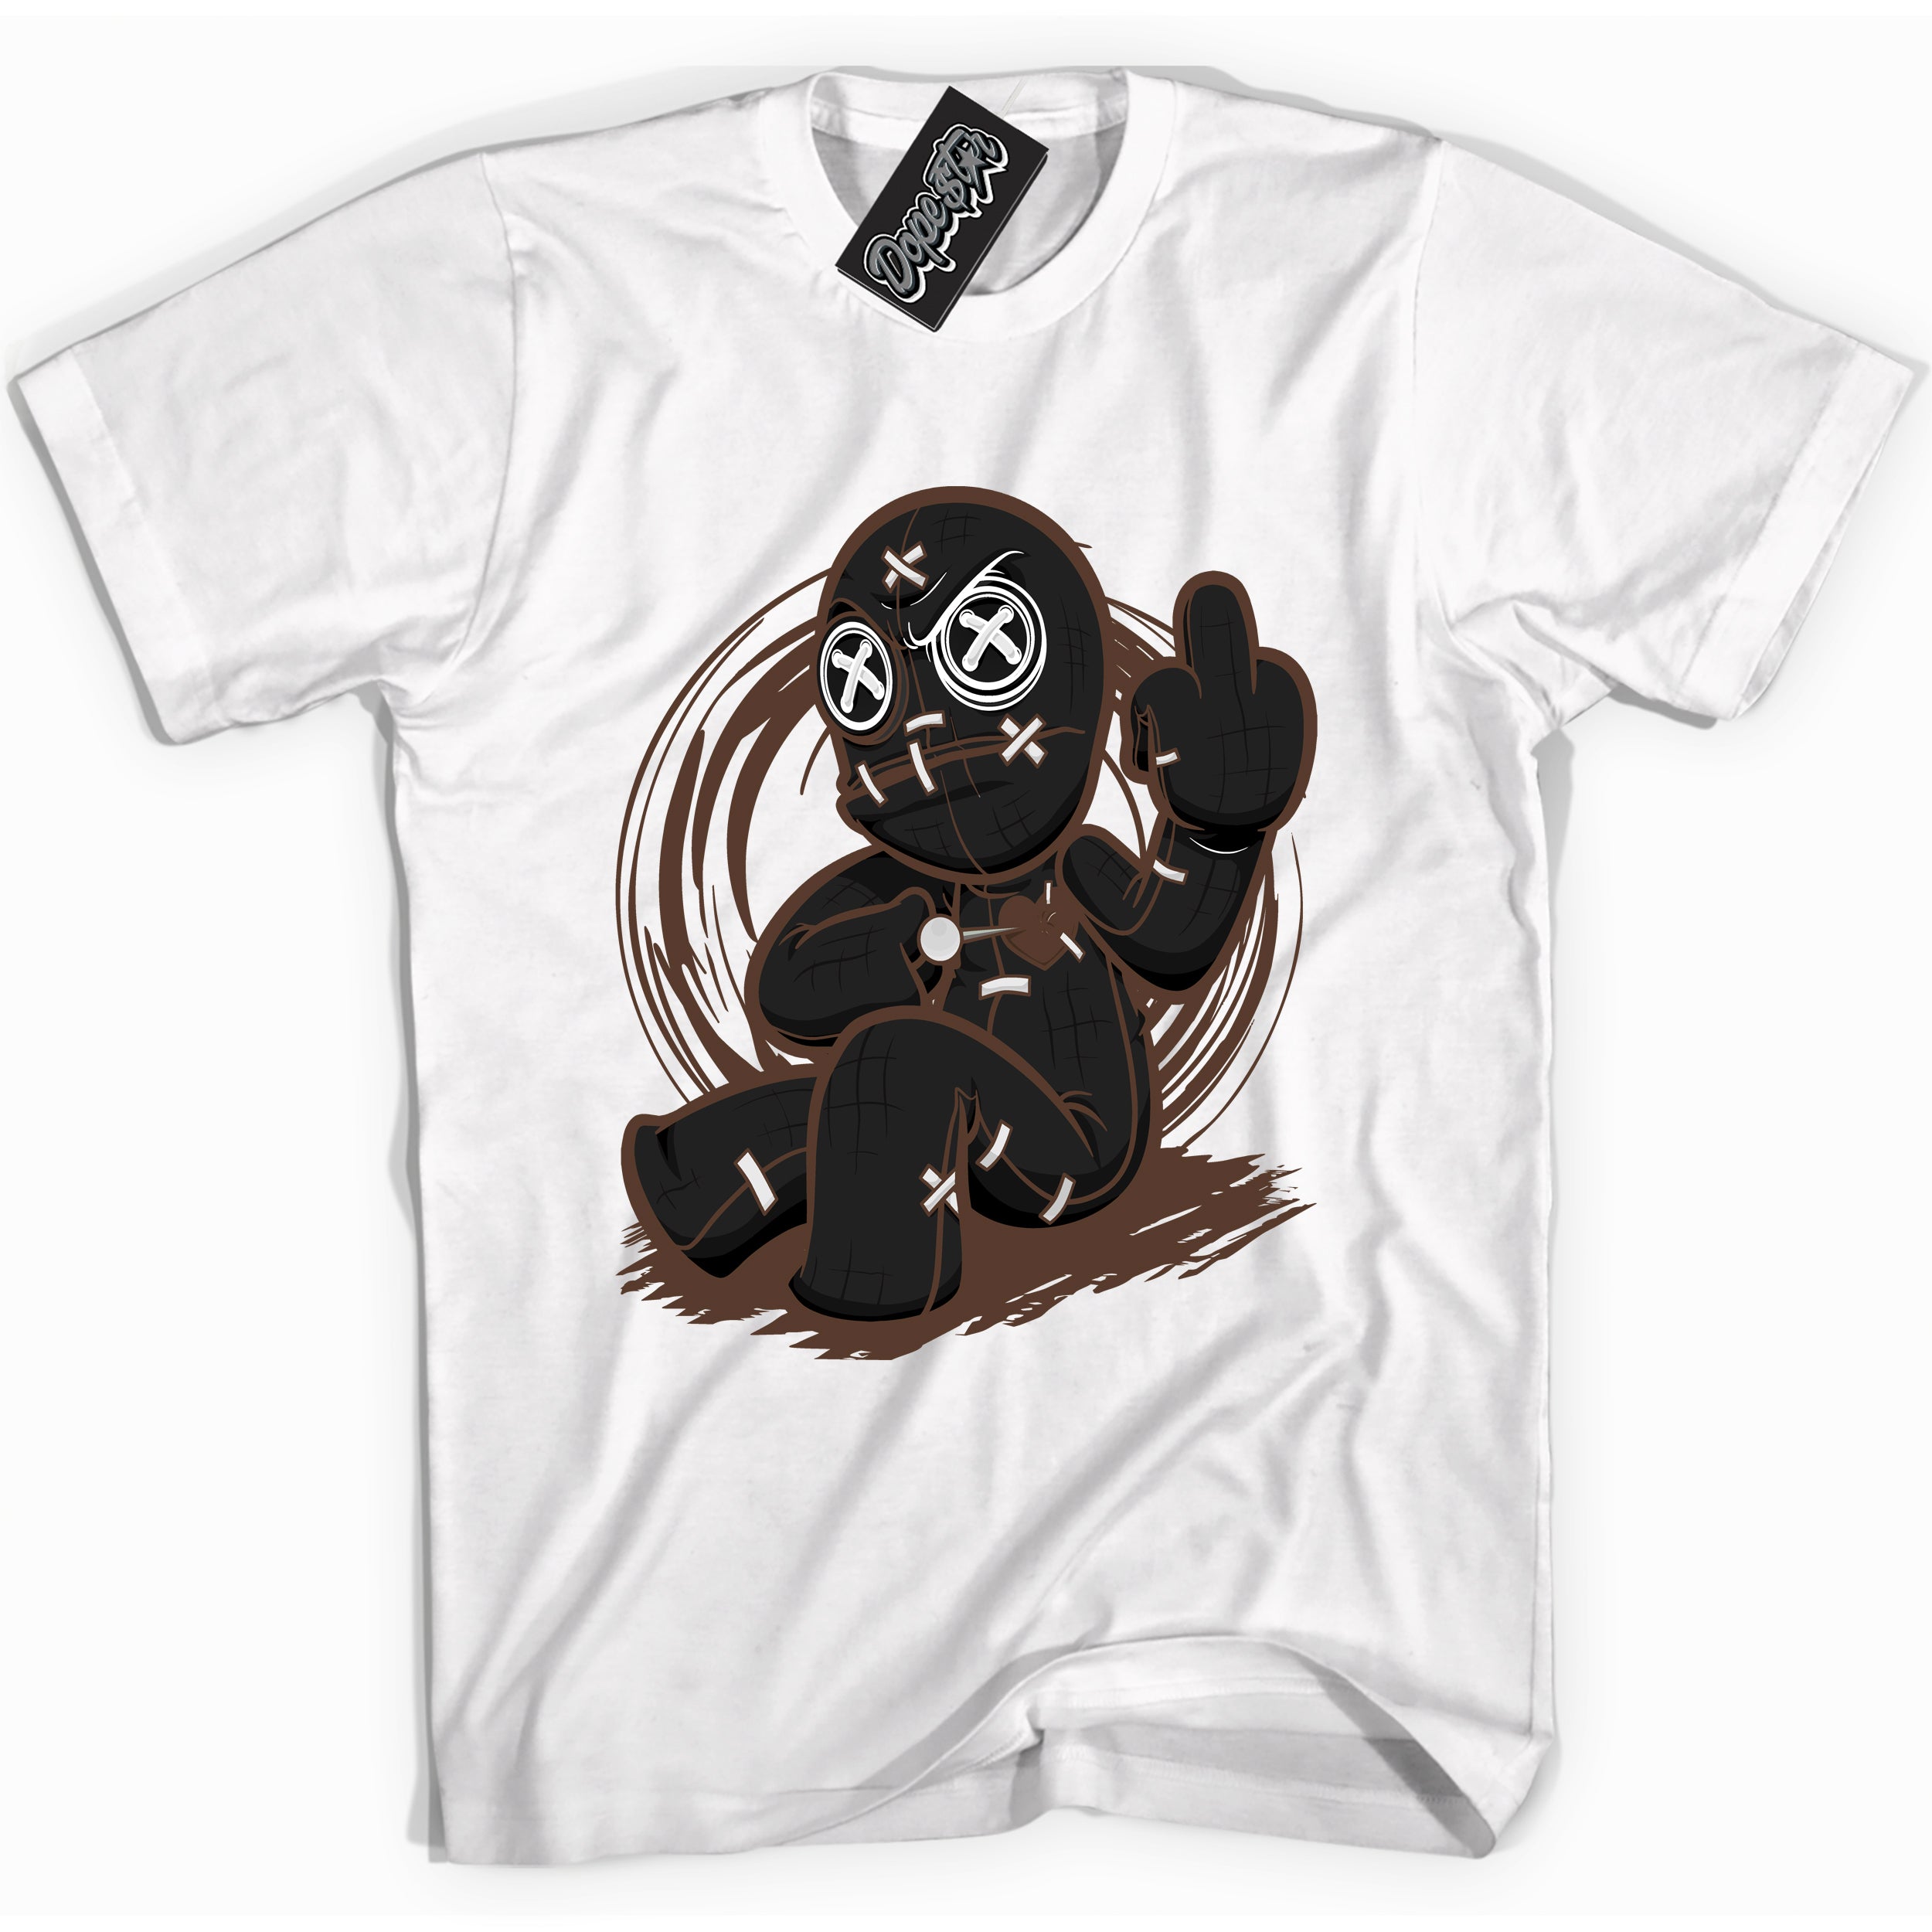 Cool White graphic tee with “ VooDoo Doll ” design, that perfectly matches Palomino 1s sneakers 